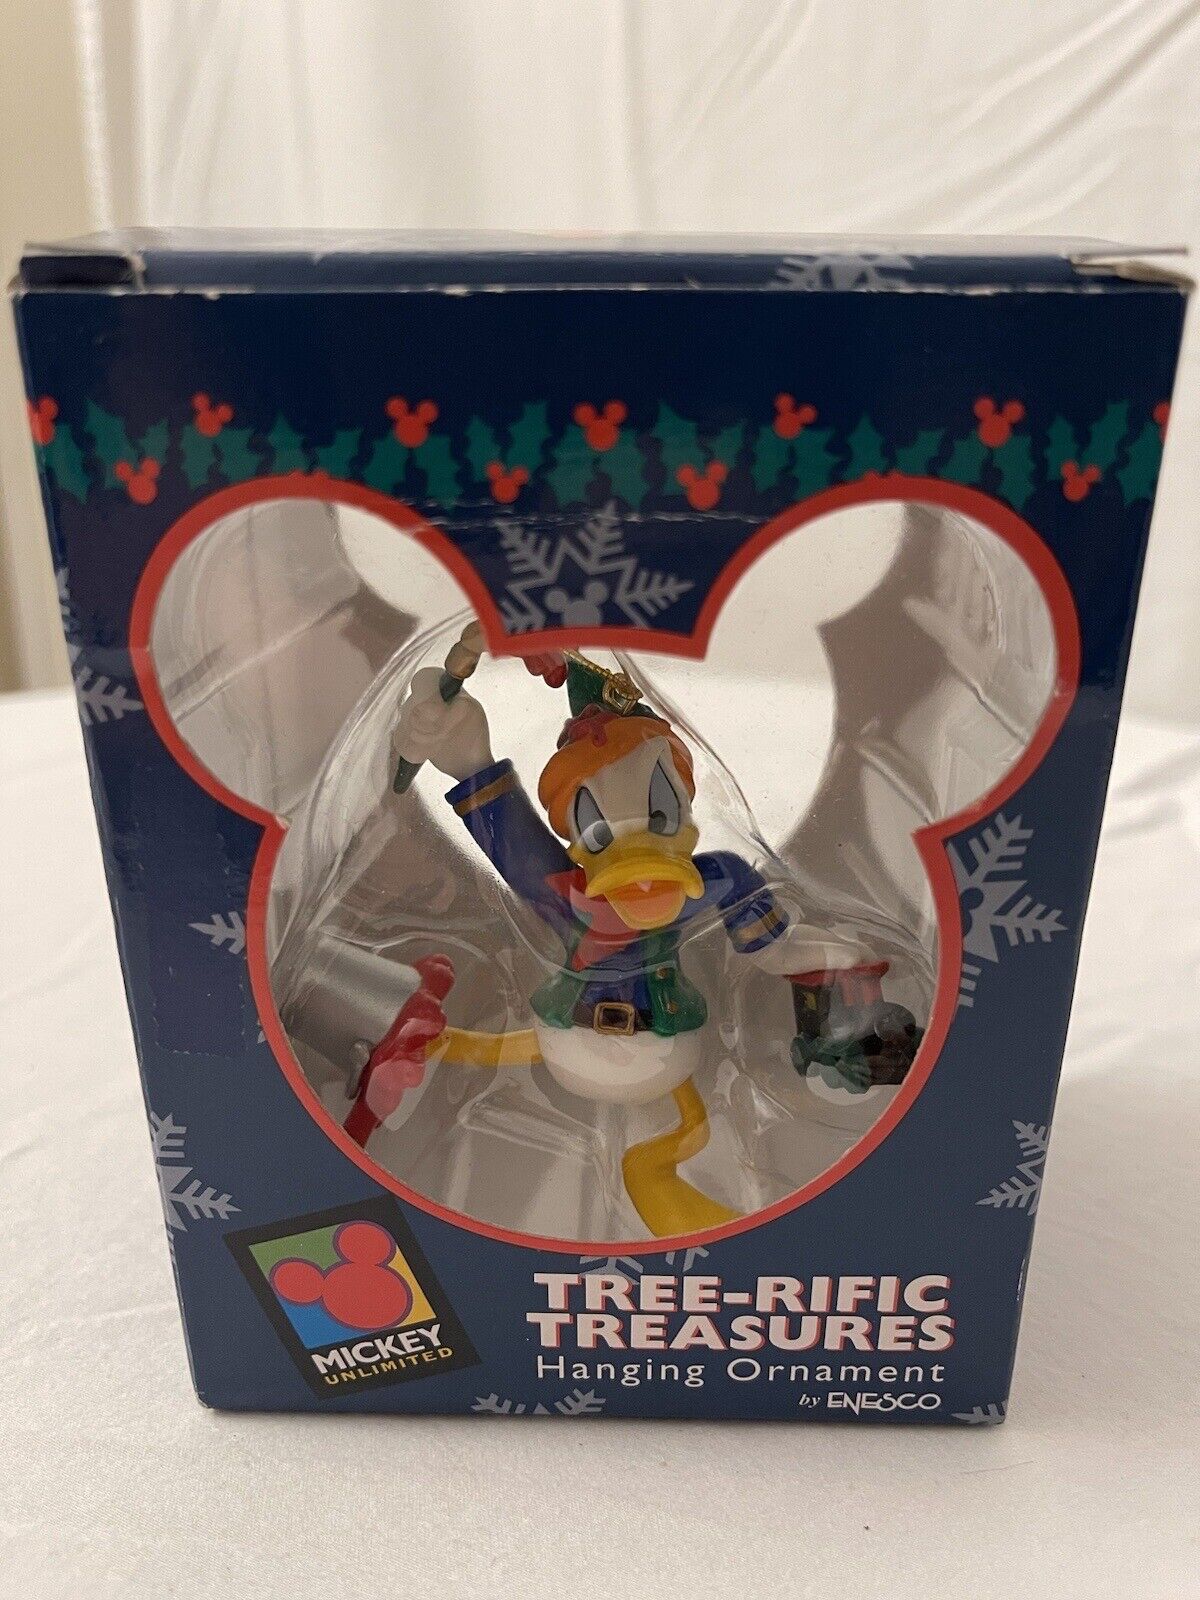 Mickey Unlimited Donald Duck Tree-rific Treasures Hanging Ornament By Enesco